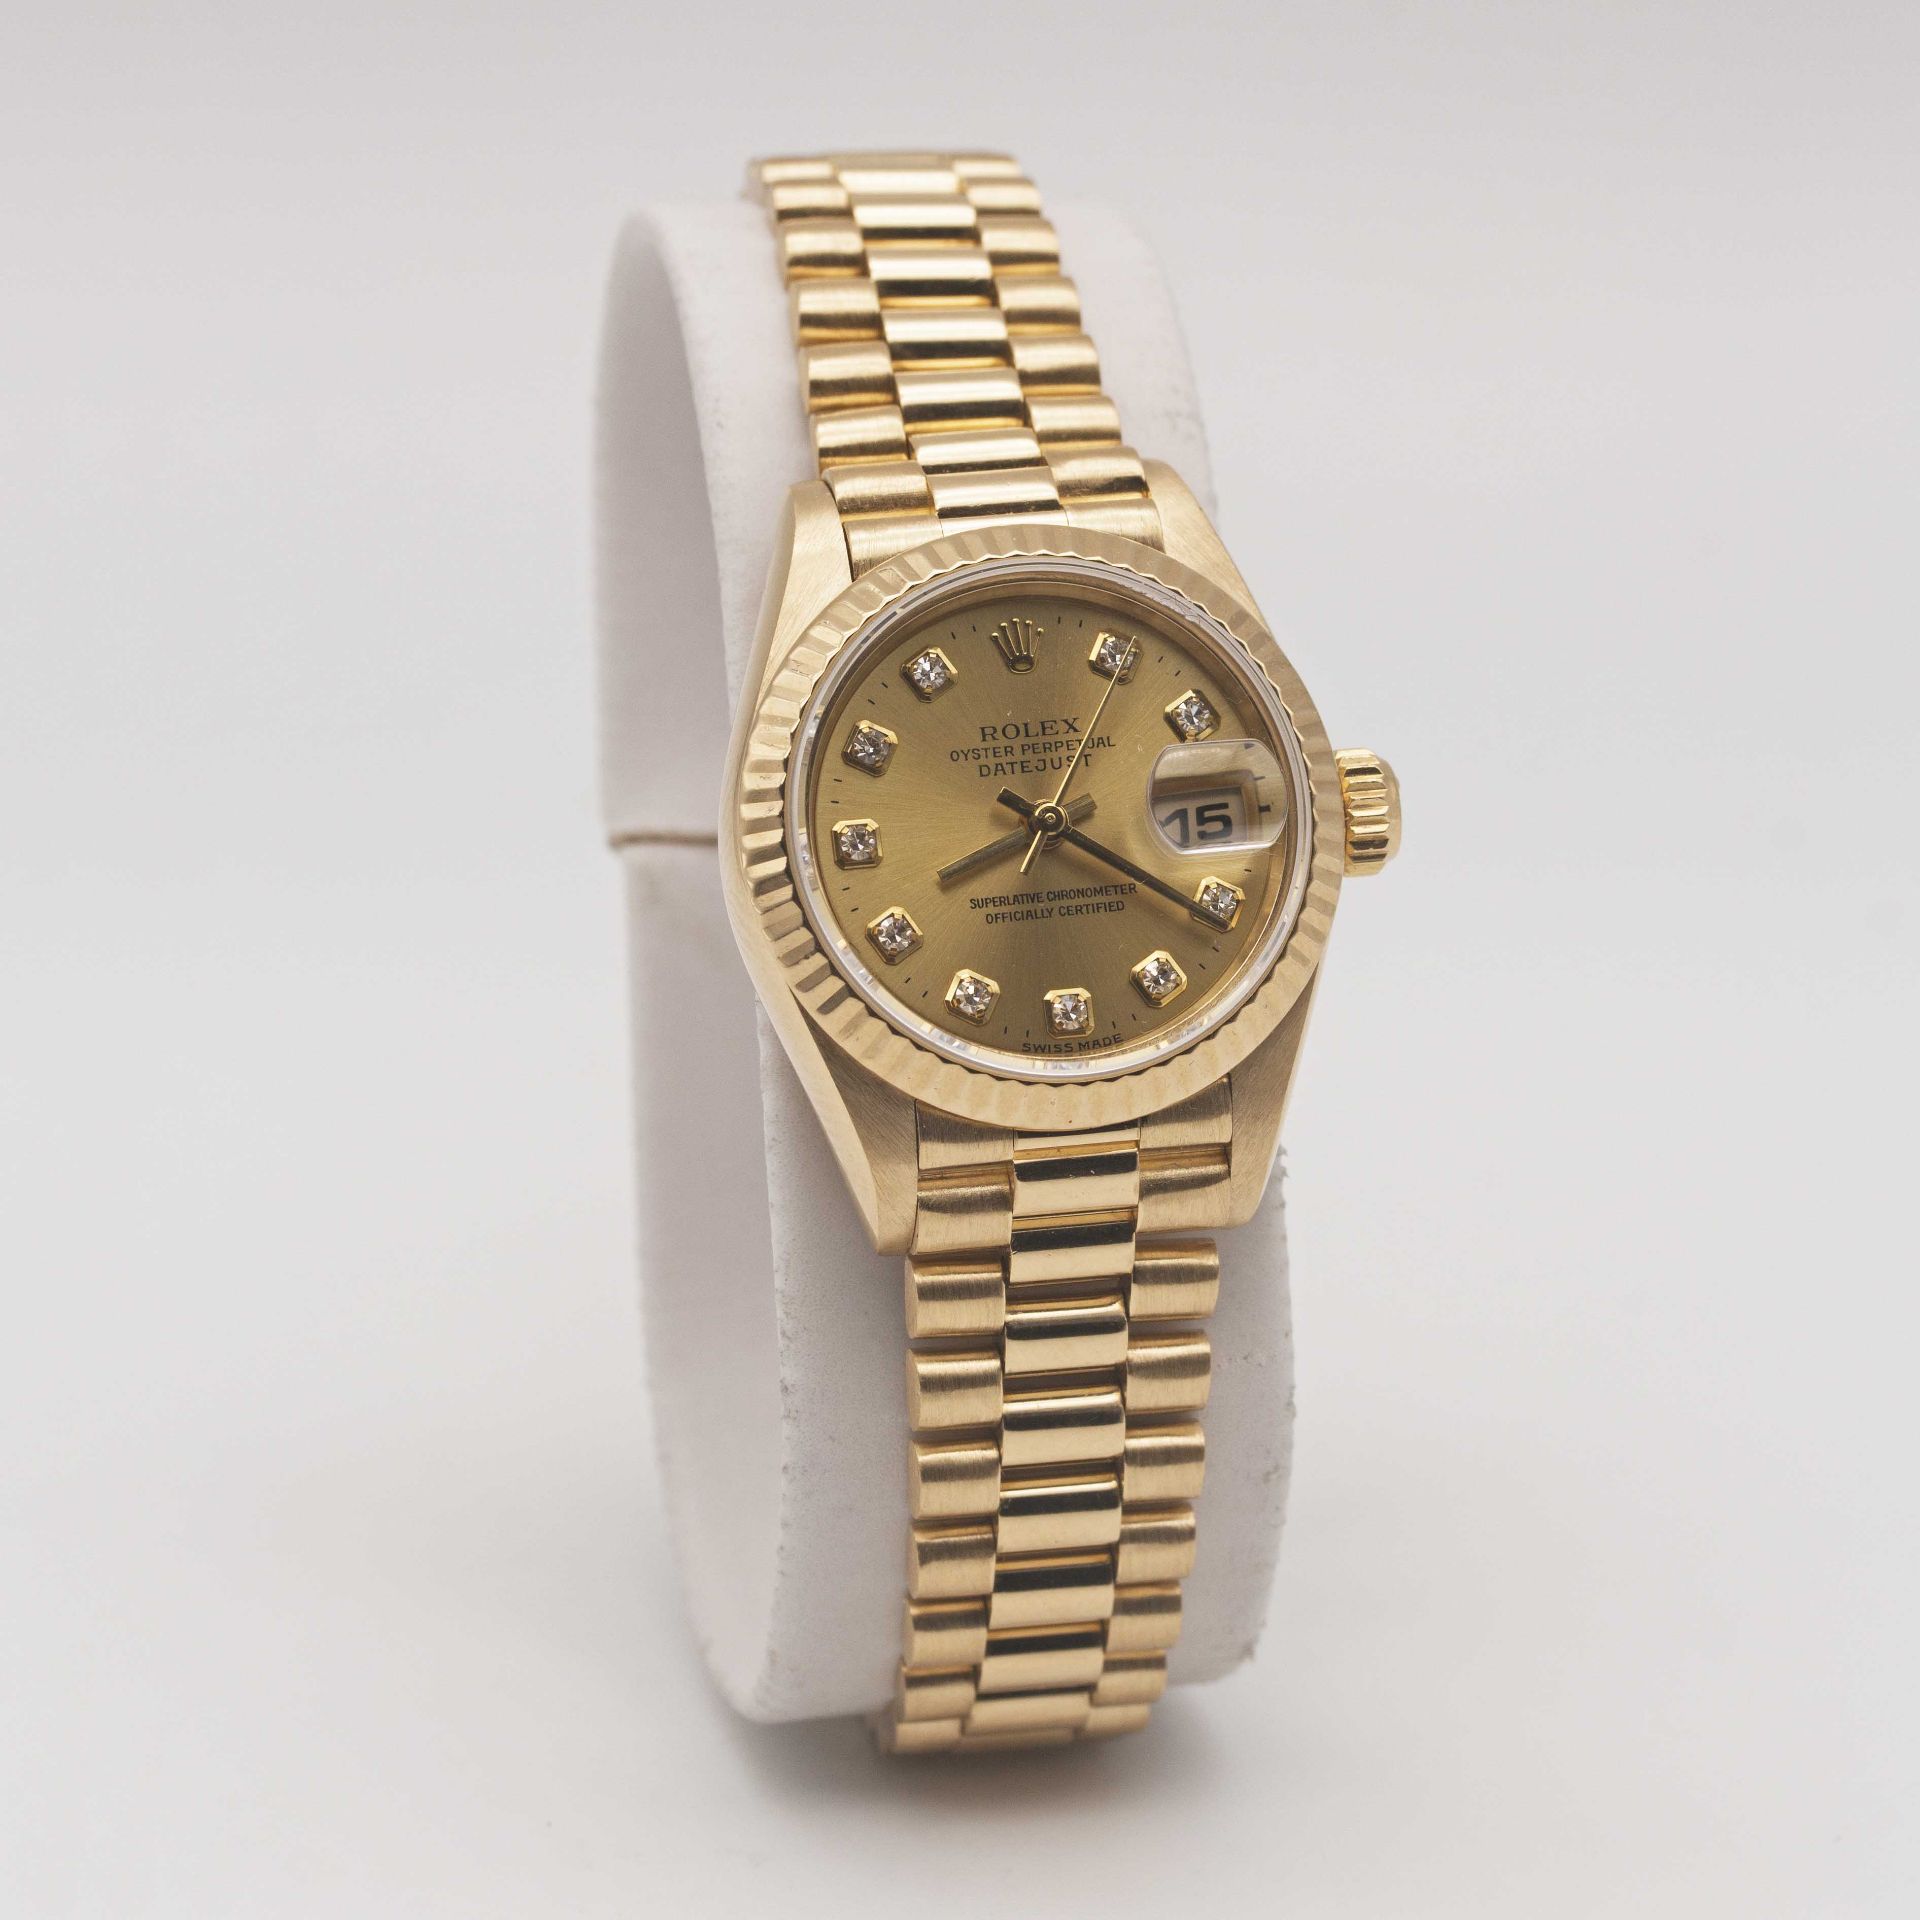 A LADIES 18K SOLID GOLD ROLEX OYSTER PERPETUAL DATEJUST BRACELET WATCH CIRCA 1996, REF. 69178 WITH - Image 4 of 12